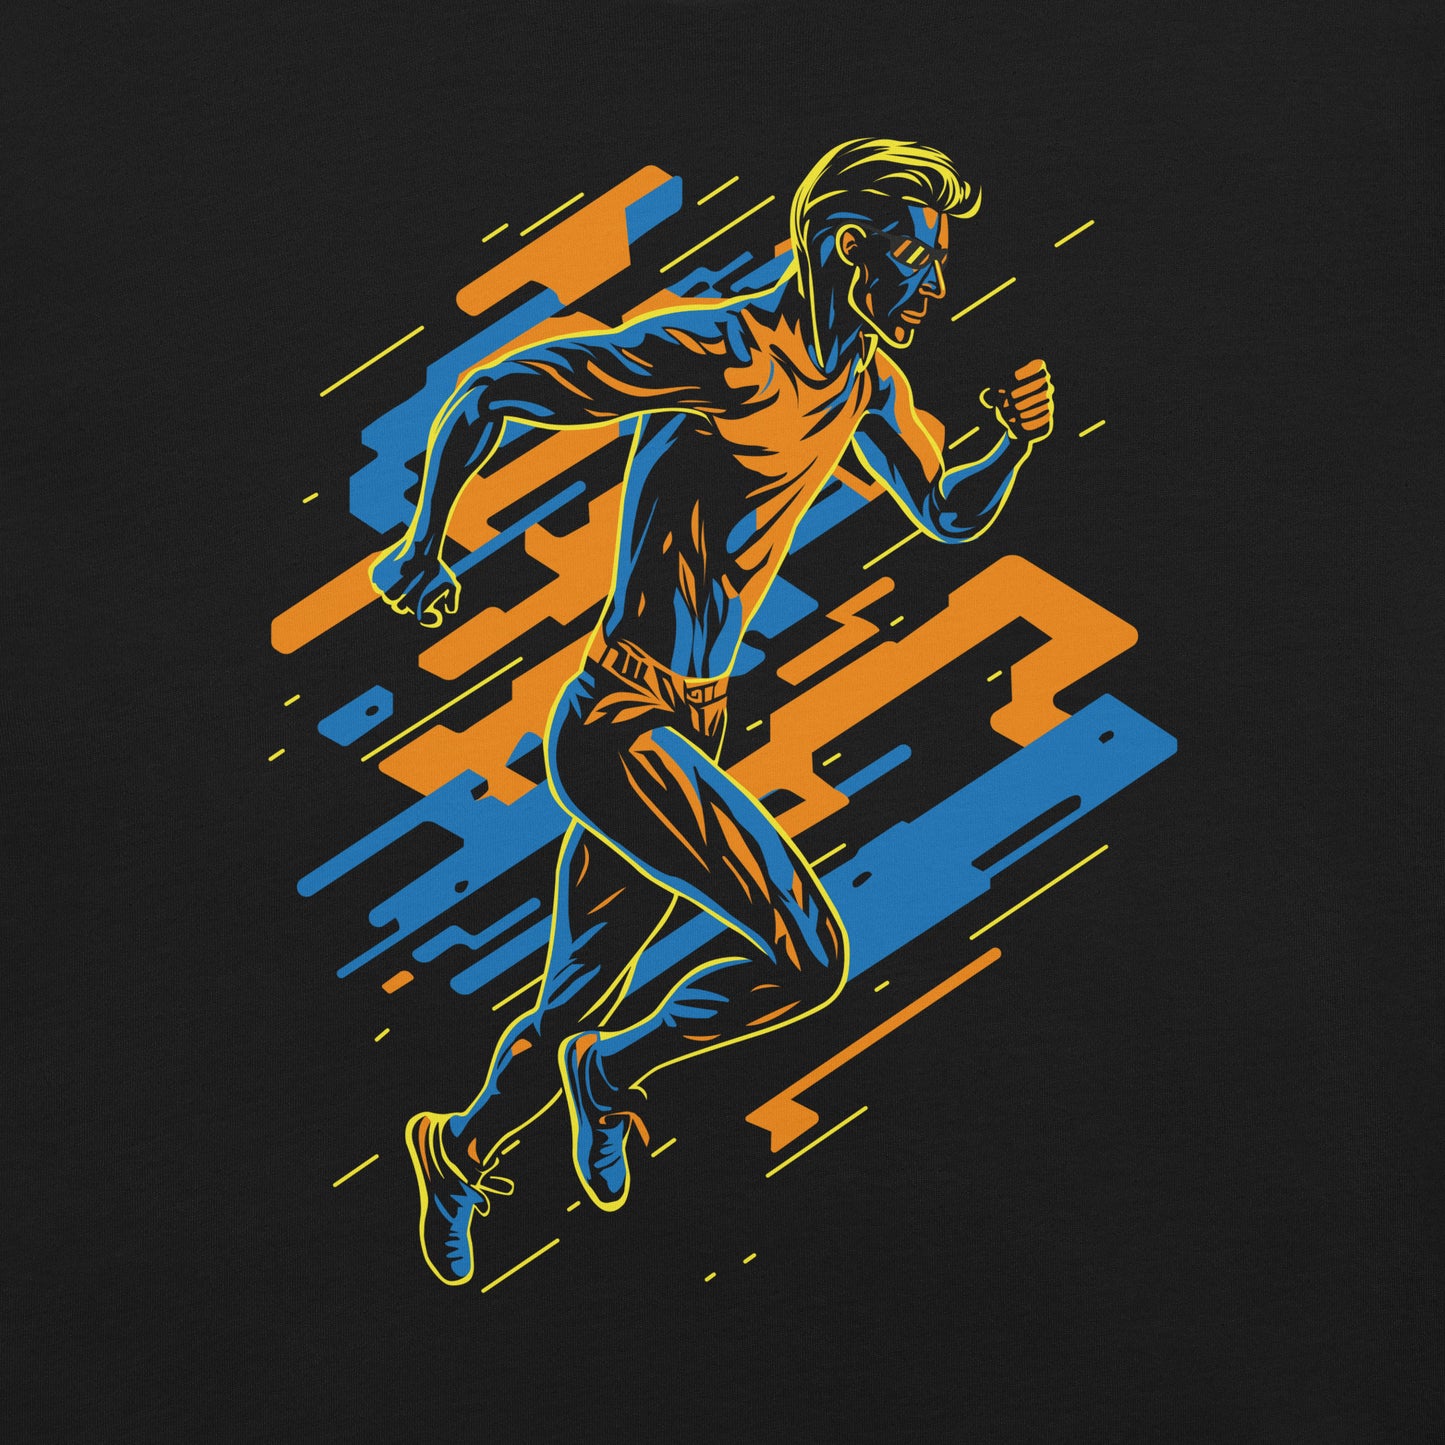 Vibrant and dynamic runner design, capturing the energy of a 'Running Man'. Taken from the TEQNEON Radioactive collection